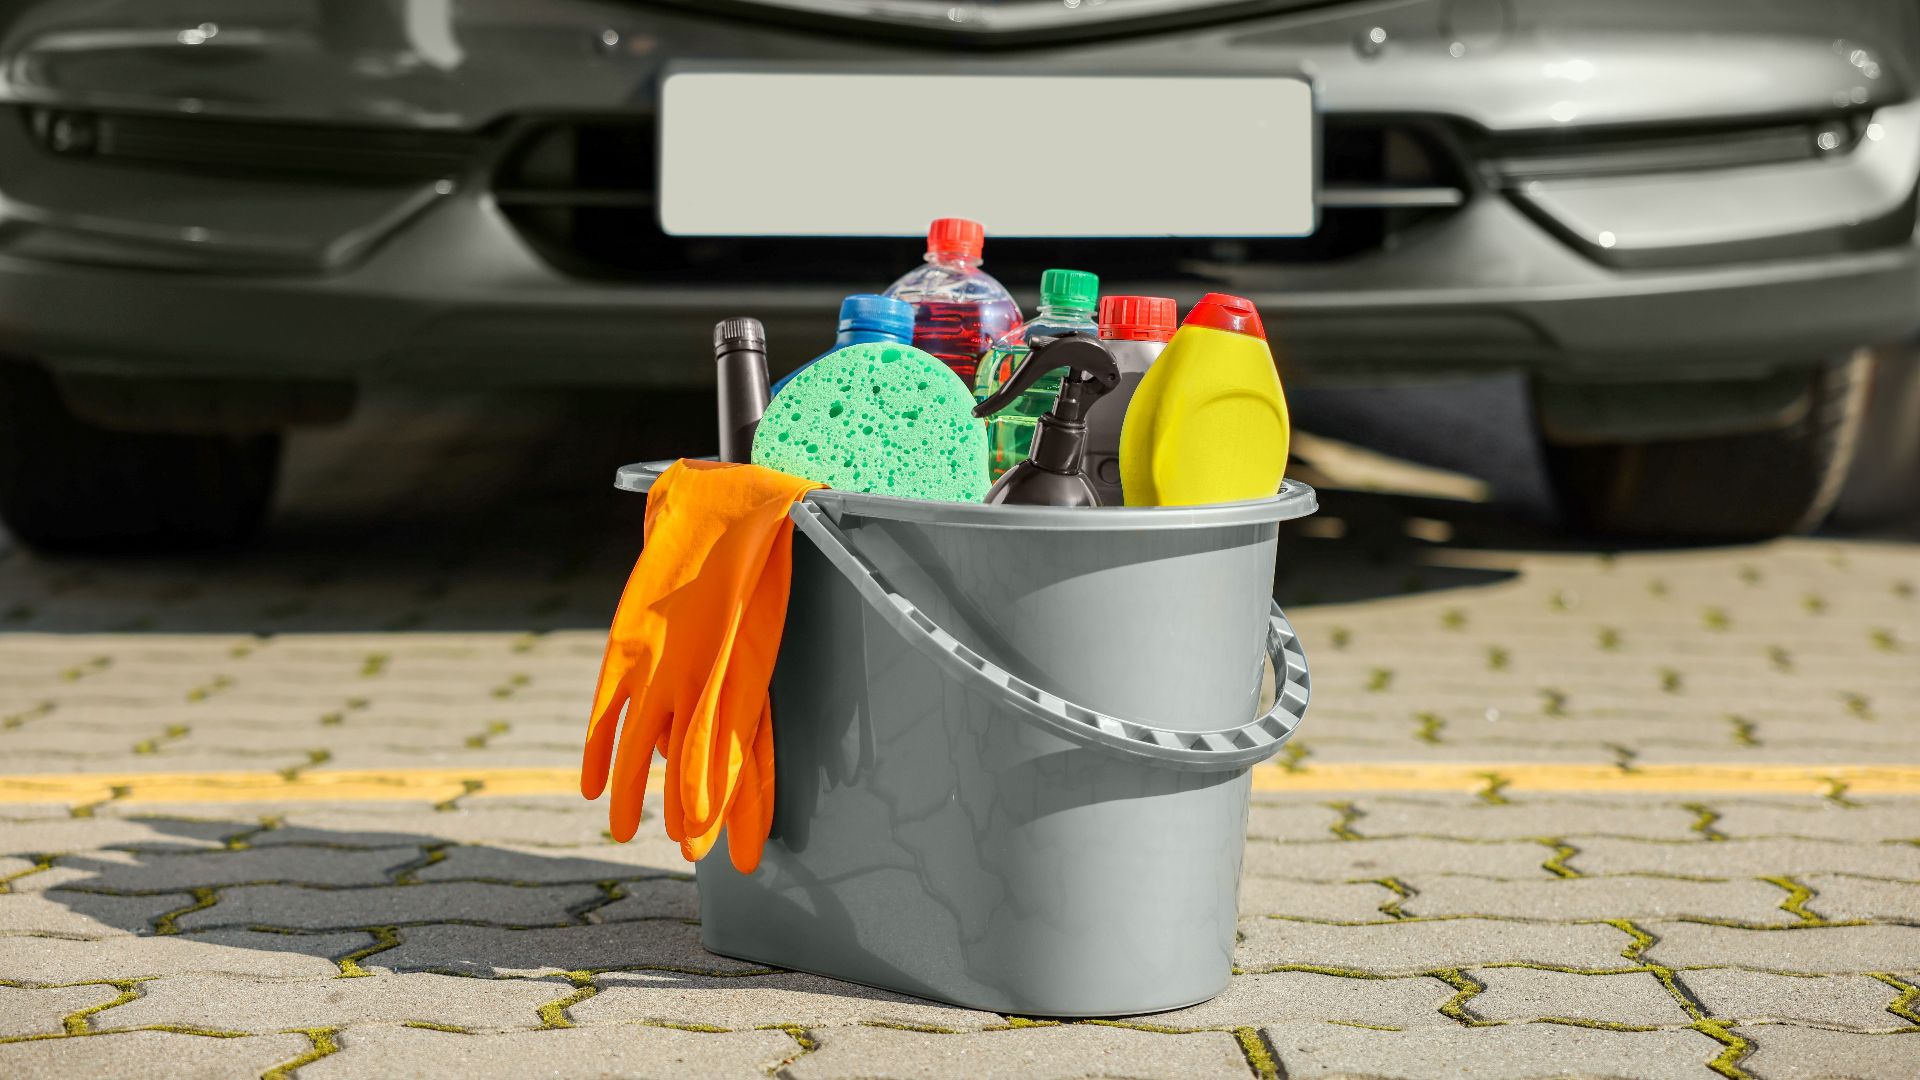 half of motorists admit to using washing-up liquid to clean their car